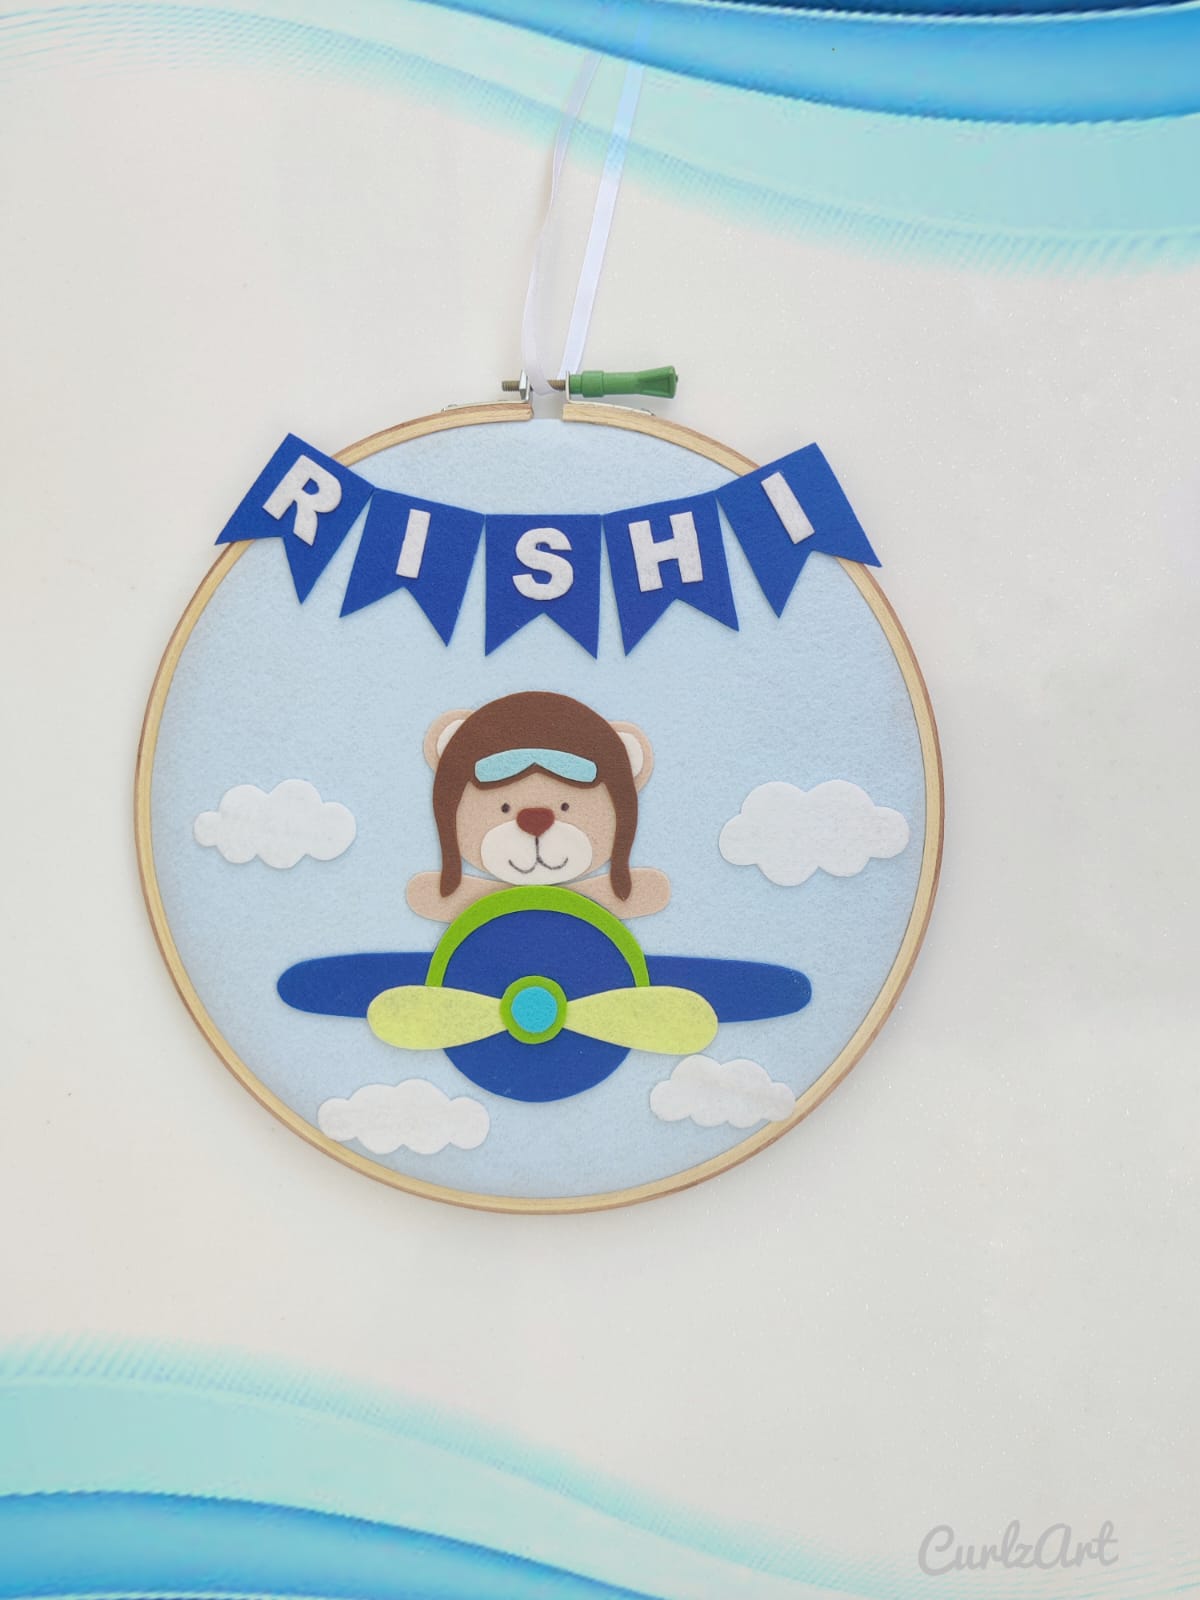 Hand-Crafted Embroidery Hoop Wall Hanging Art for Home Decor - Bear in Plane (PREPAID ORDER)